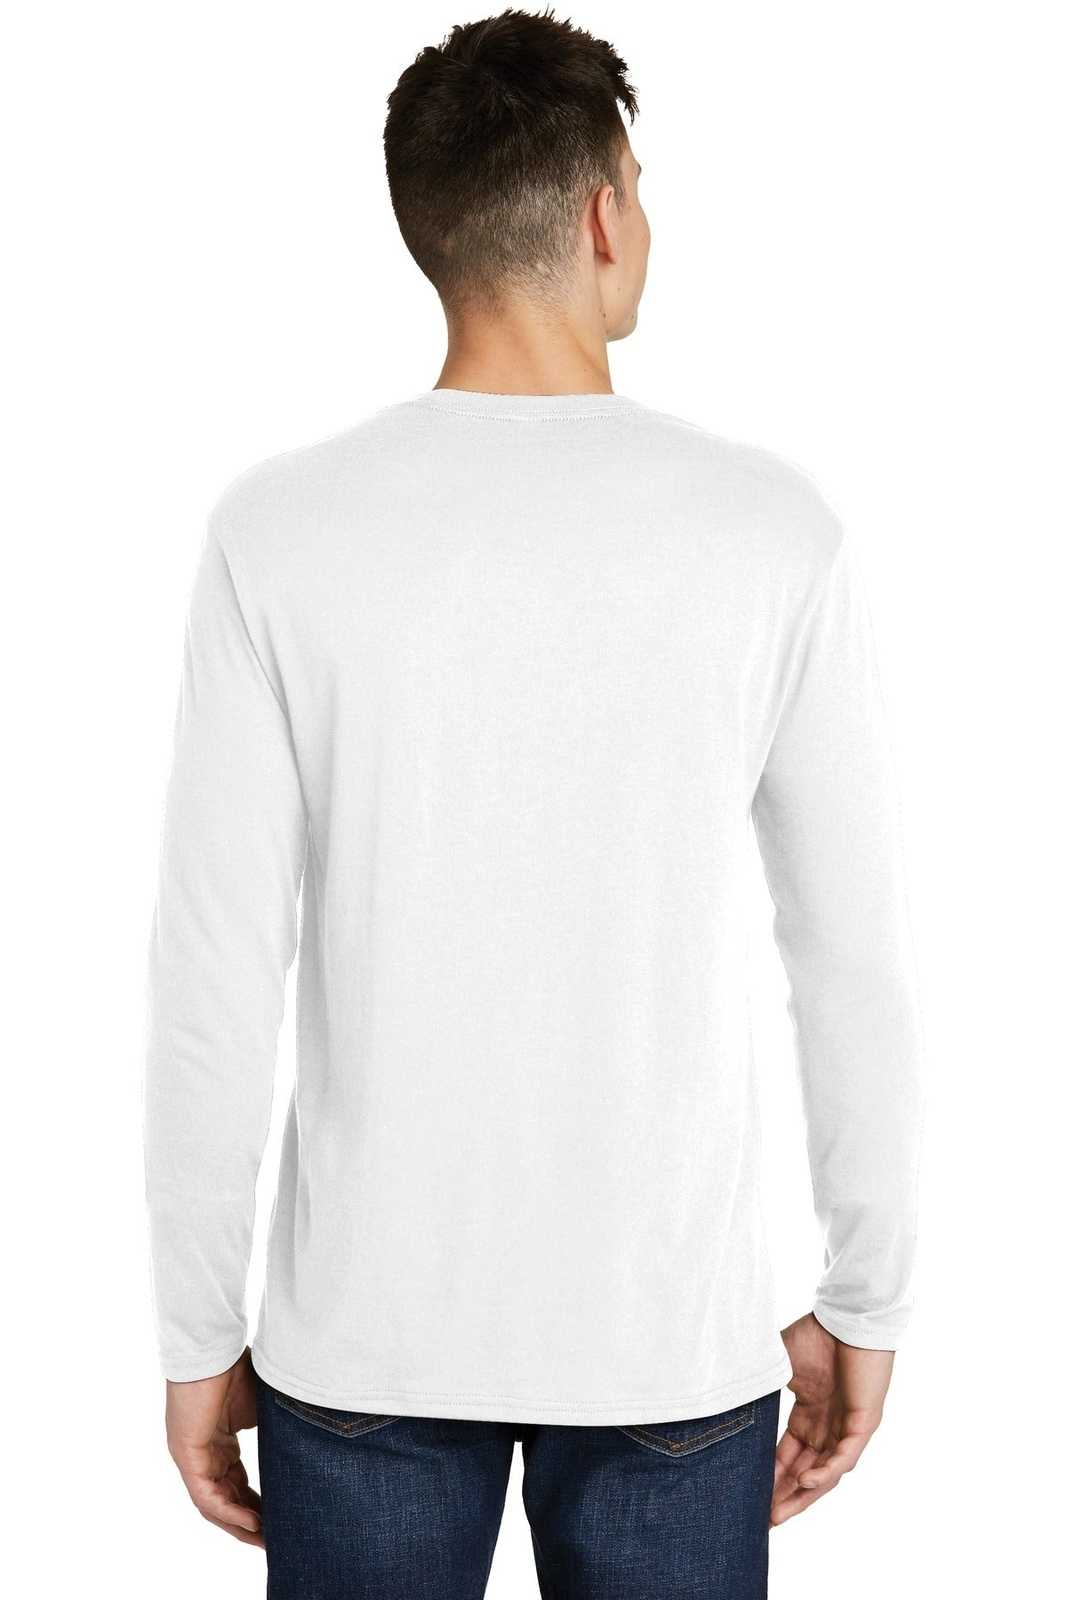 District DT6200 Very Important Tee Long Sleeve - White - HIT a Double - 2